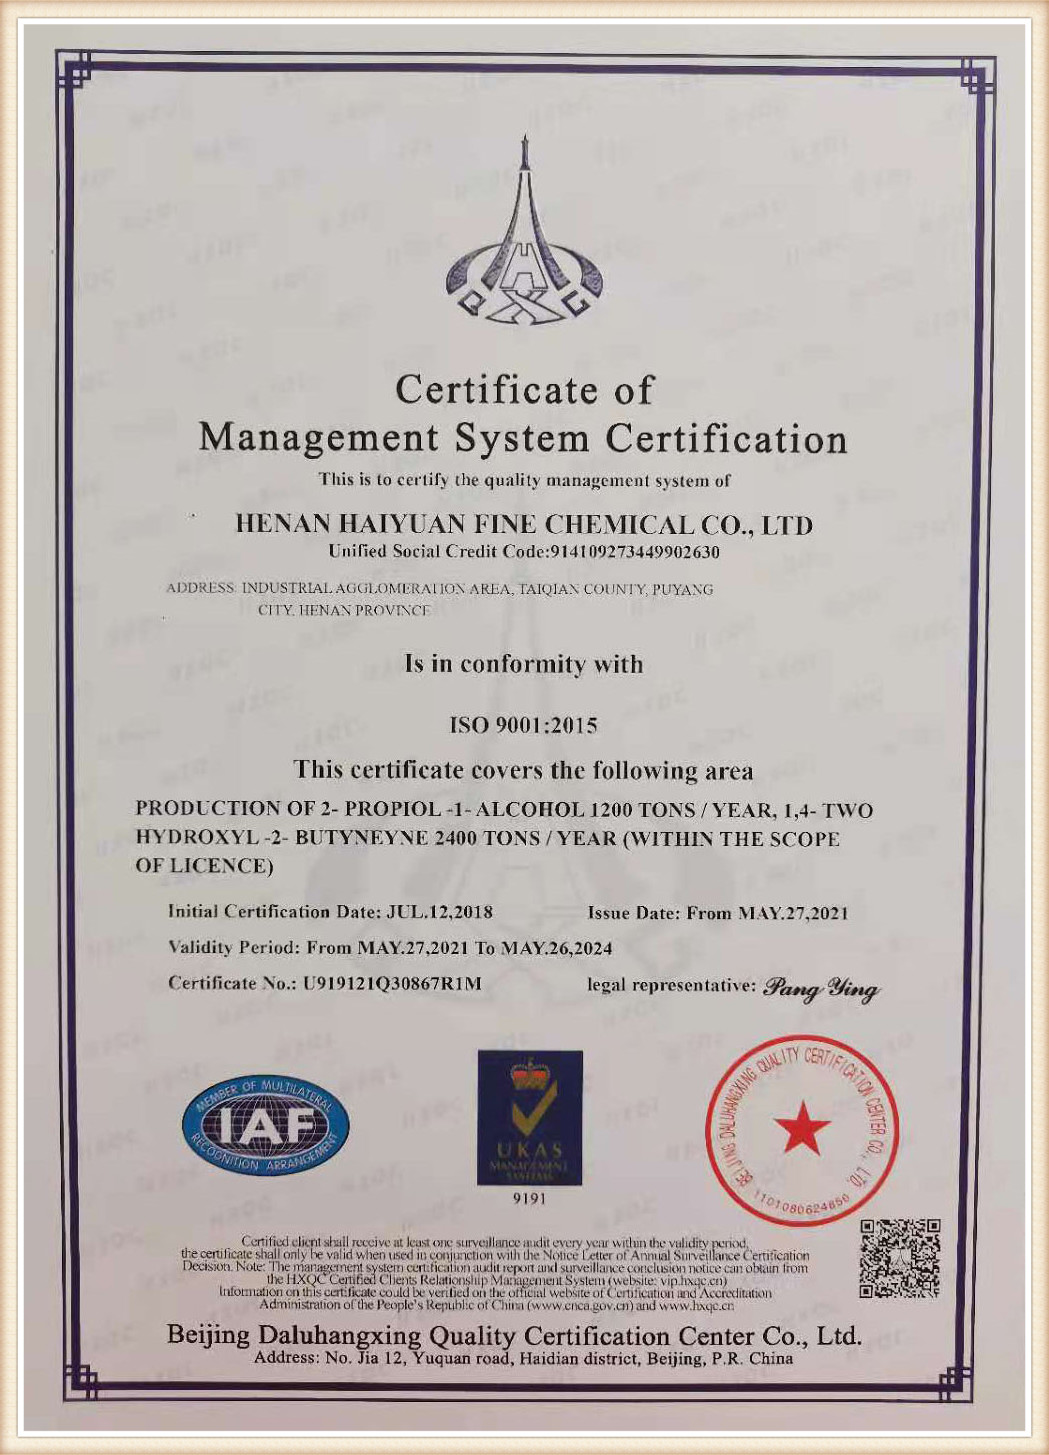 Quality management system certificate -2021